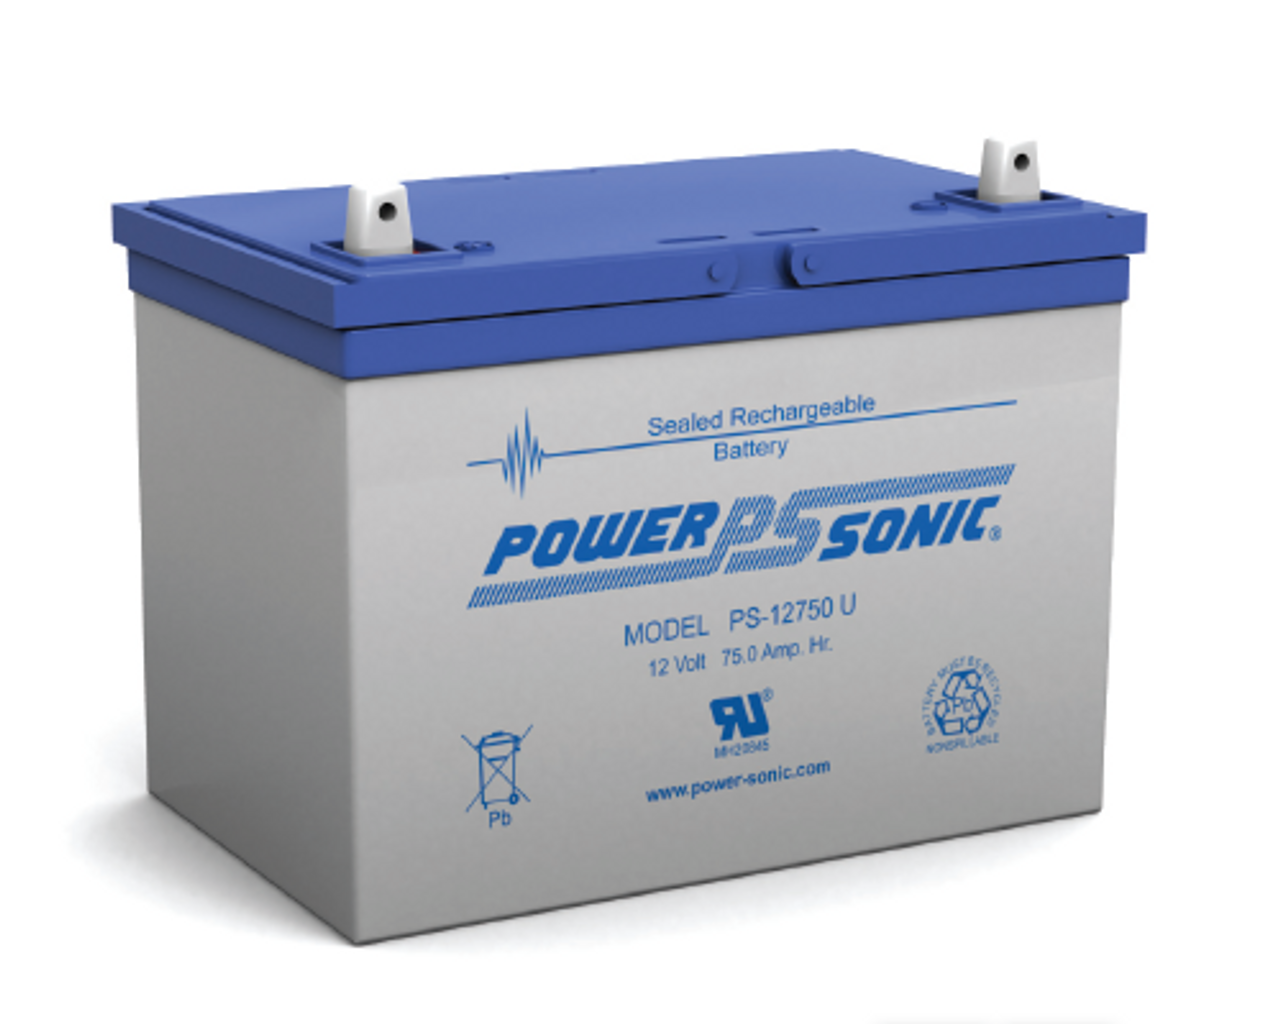 Power-Sonic PS-12750 U Battery - 12V 75.0Ah Sealed Rechargeable, Replacement Batteries for GP-12750, GP12750, GPL-12750, GPL12750, PS-12750, PS-12750NB, PS12600, RBC-13, RBC-14